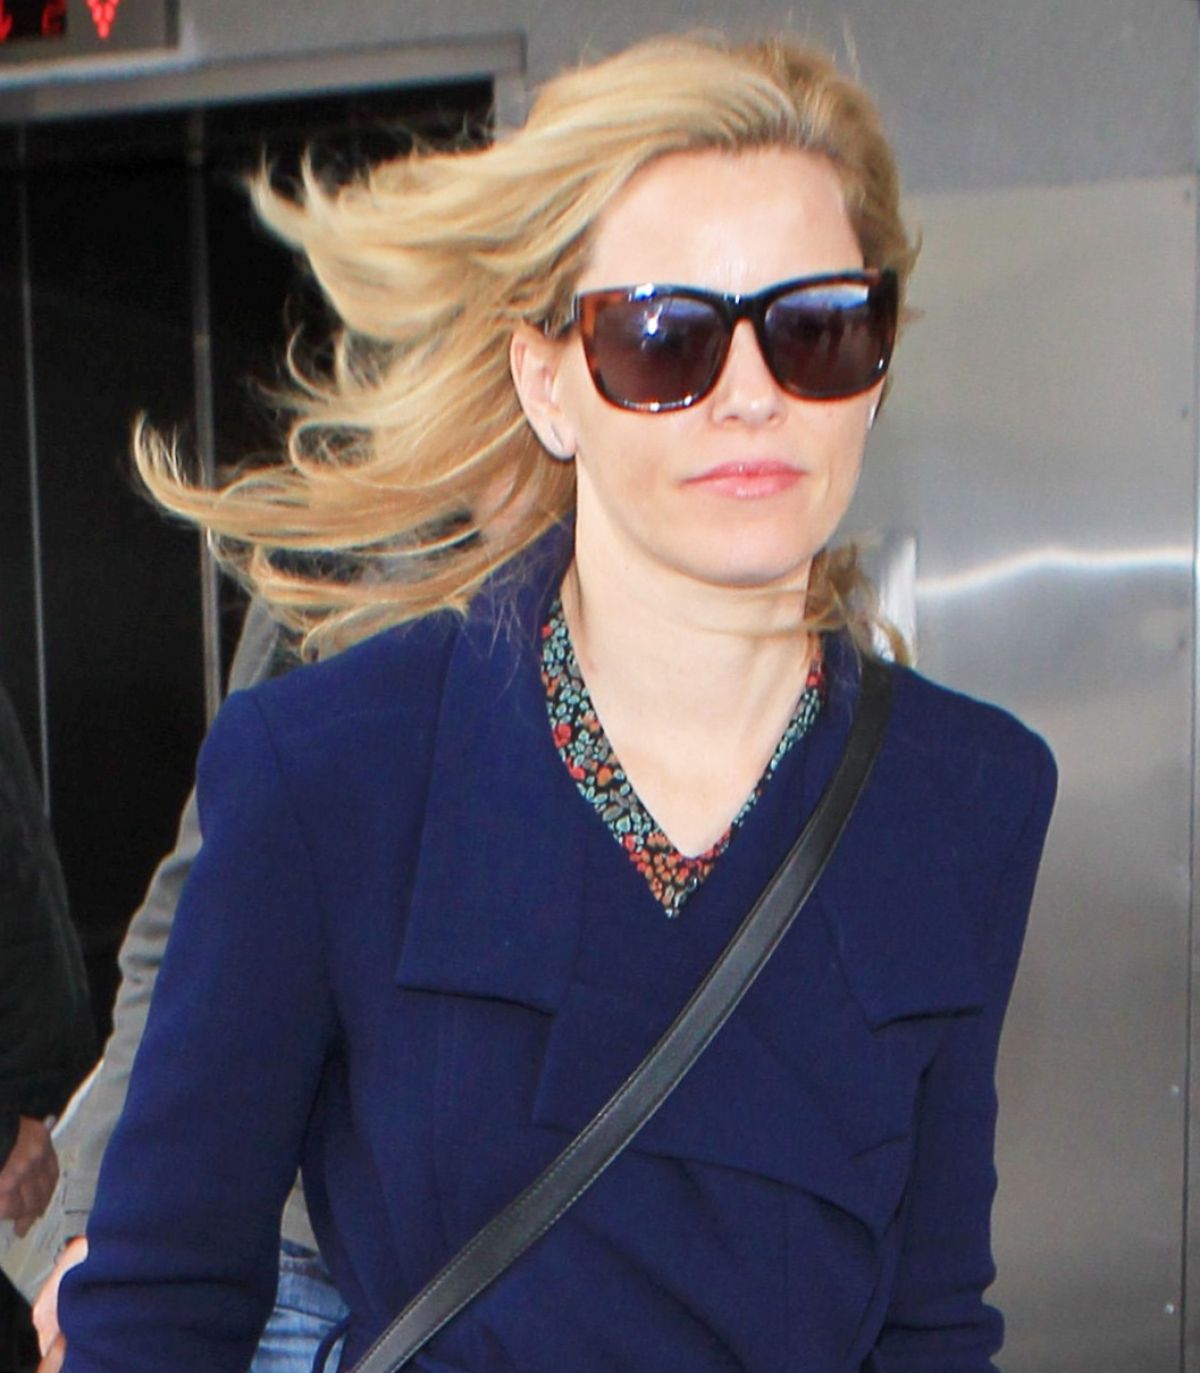 ELIZABETH BANKS at LAX Airport in Los Angeles 11/15/2015 – HawtCelebs